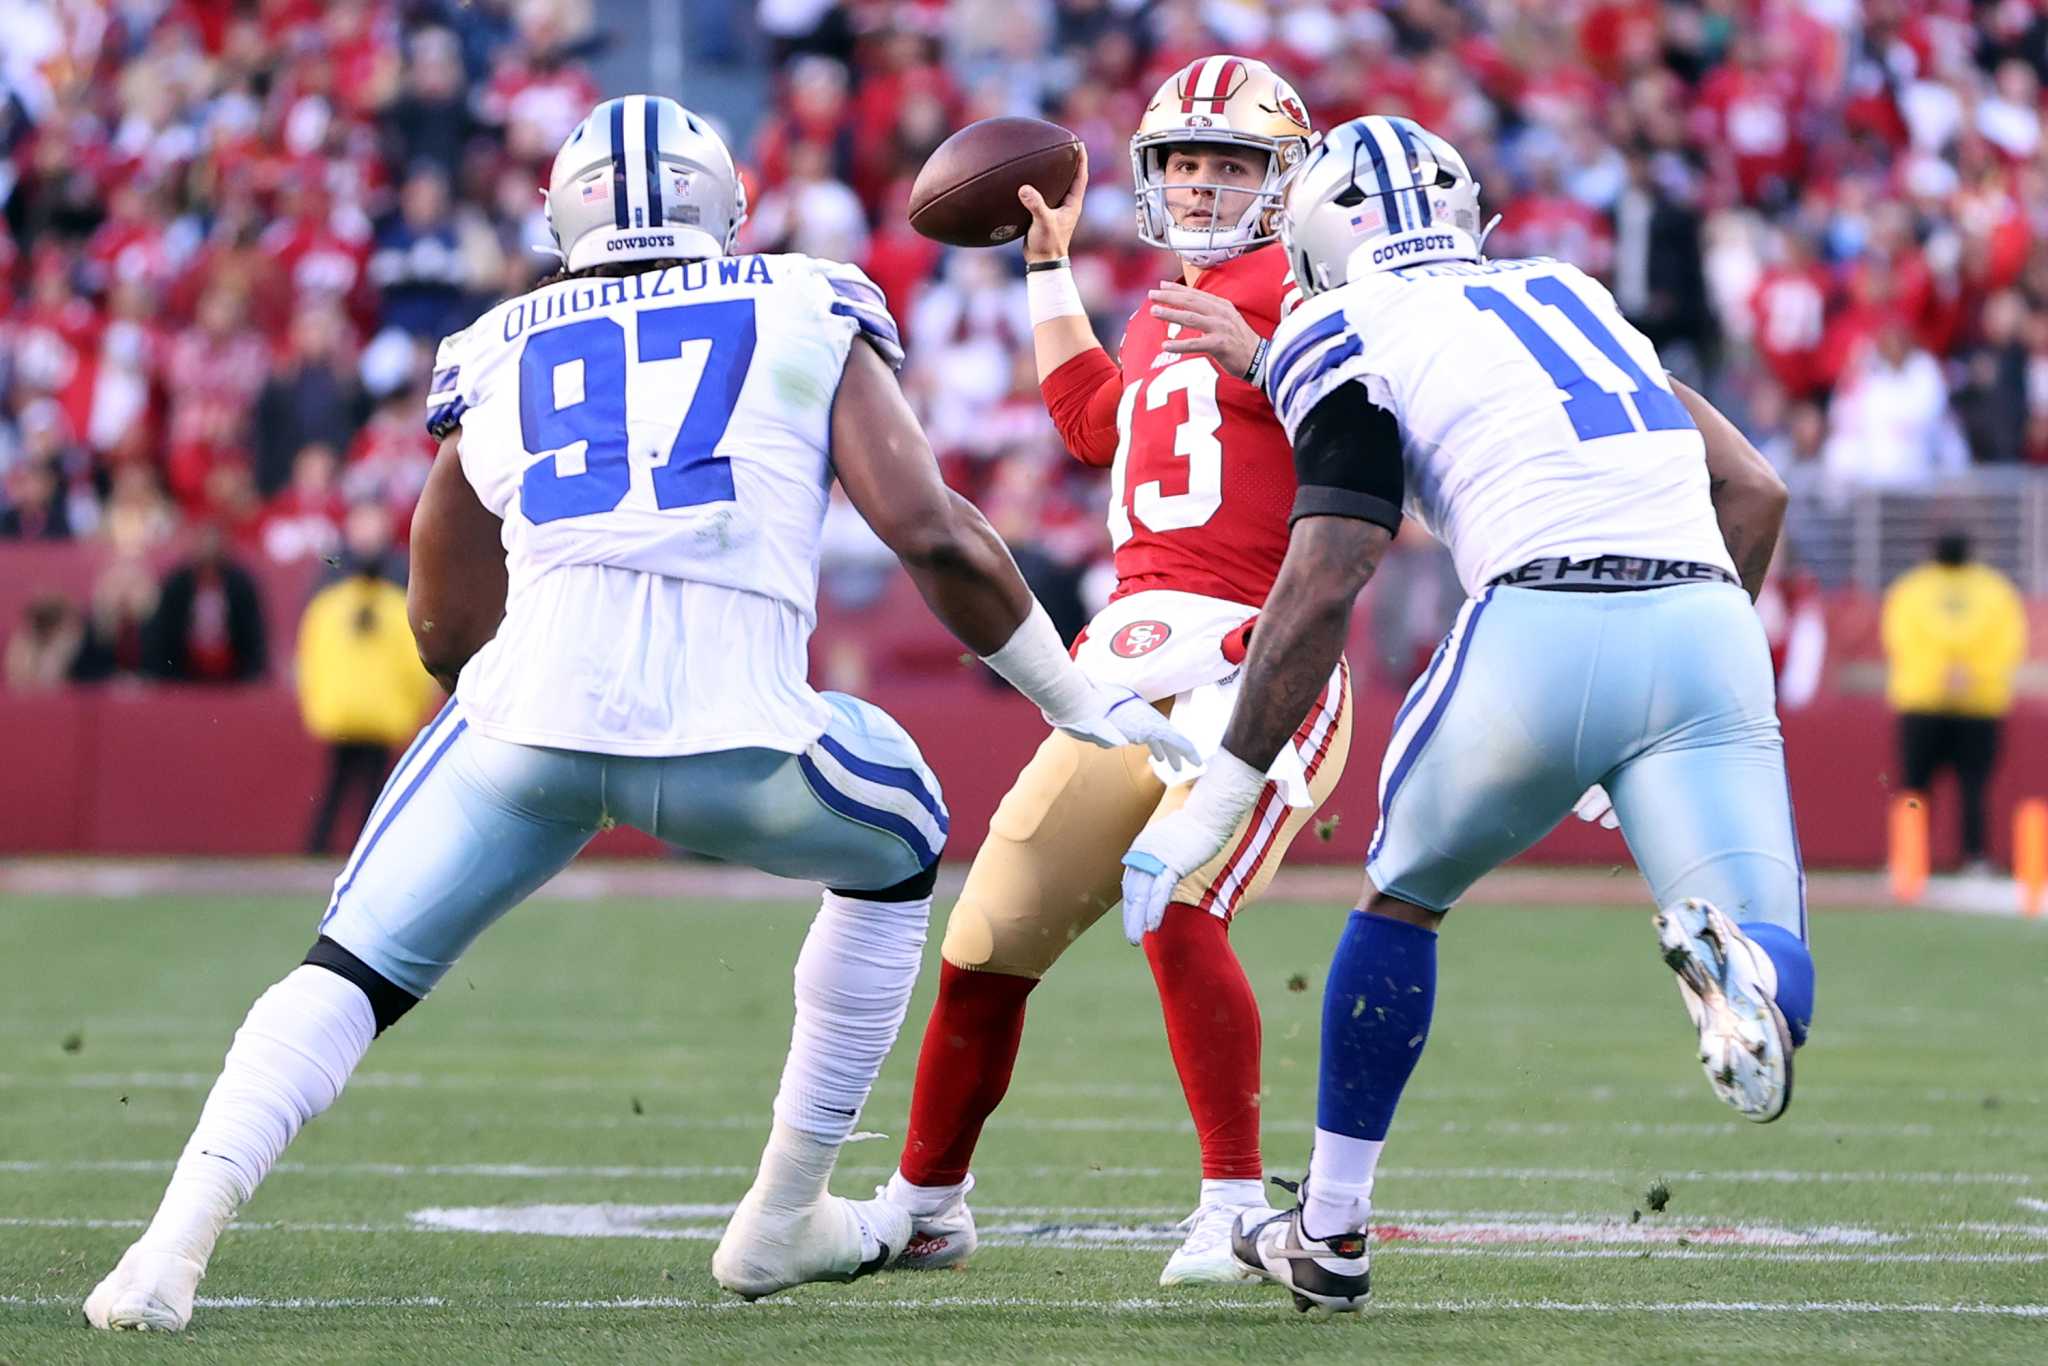 Cowboys don't pull off late miracle, fall to 49ers 19-12 in NFC